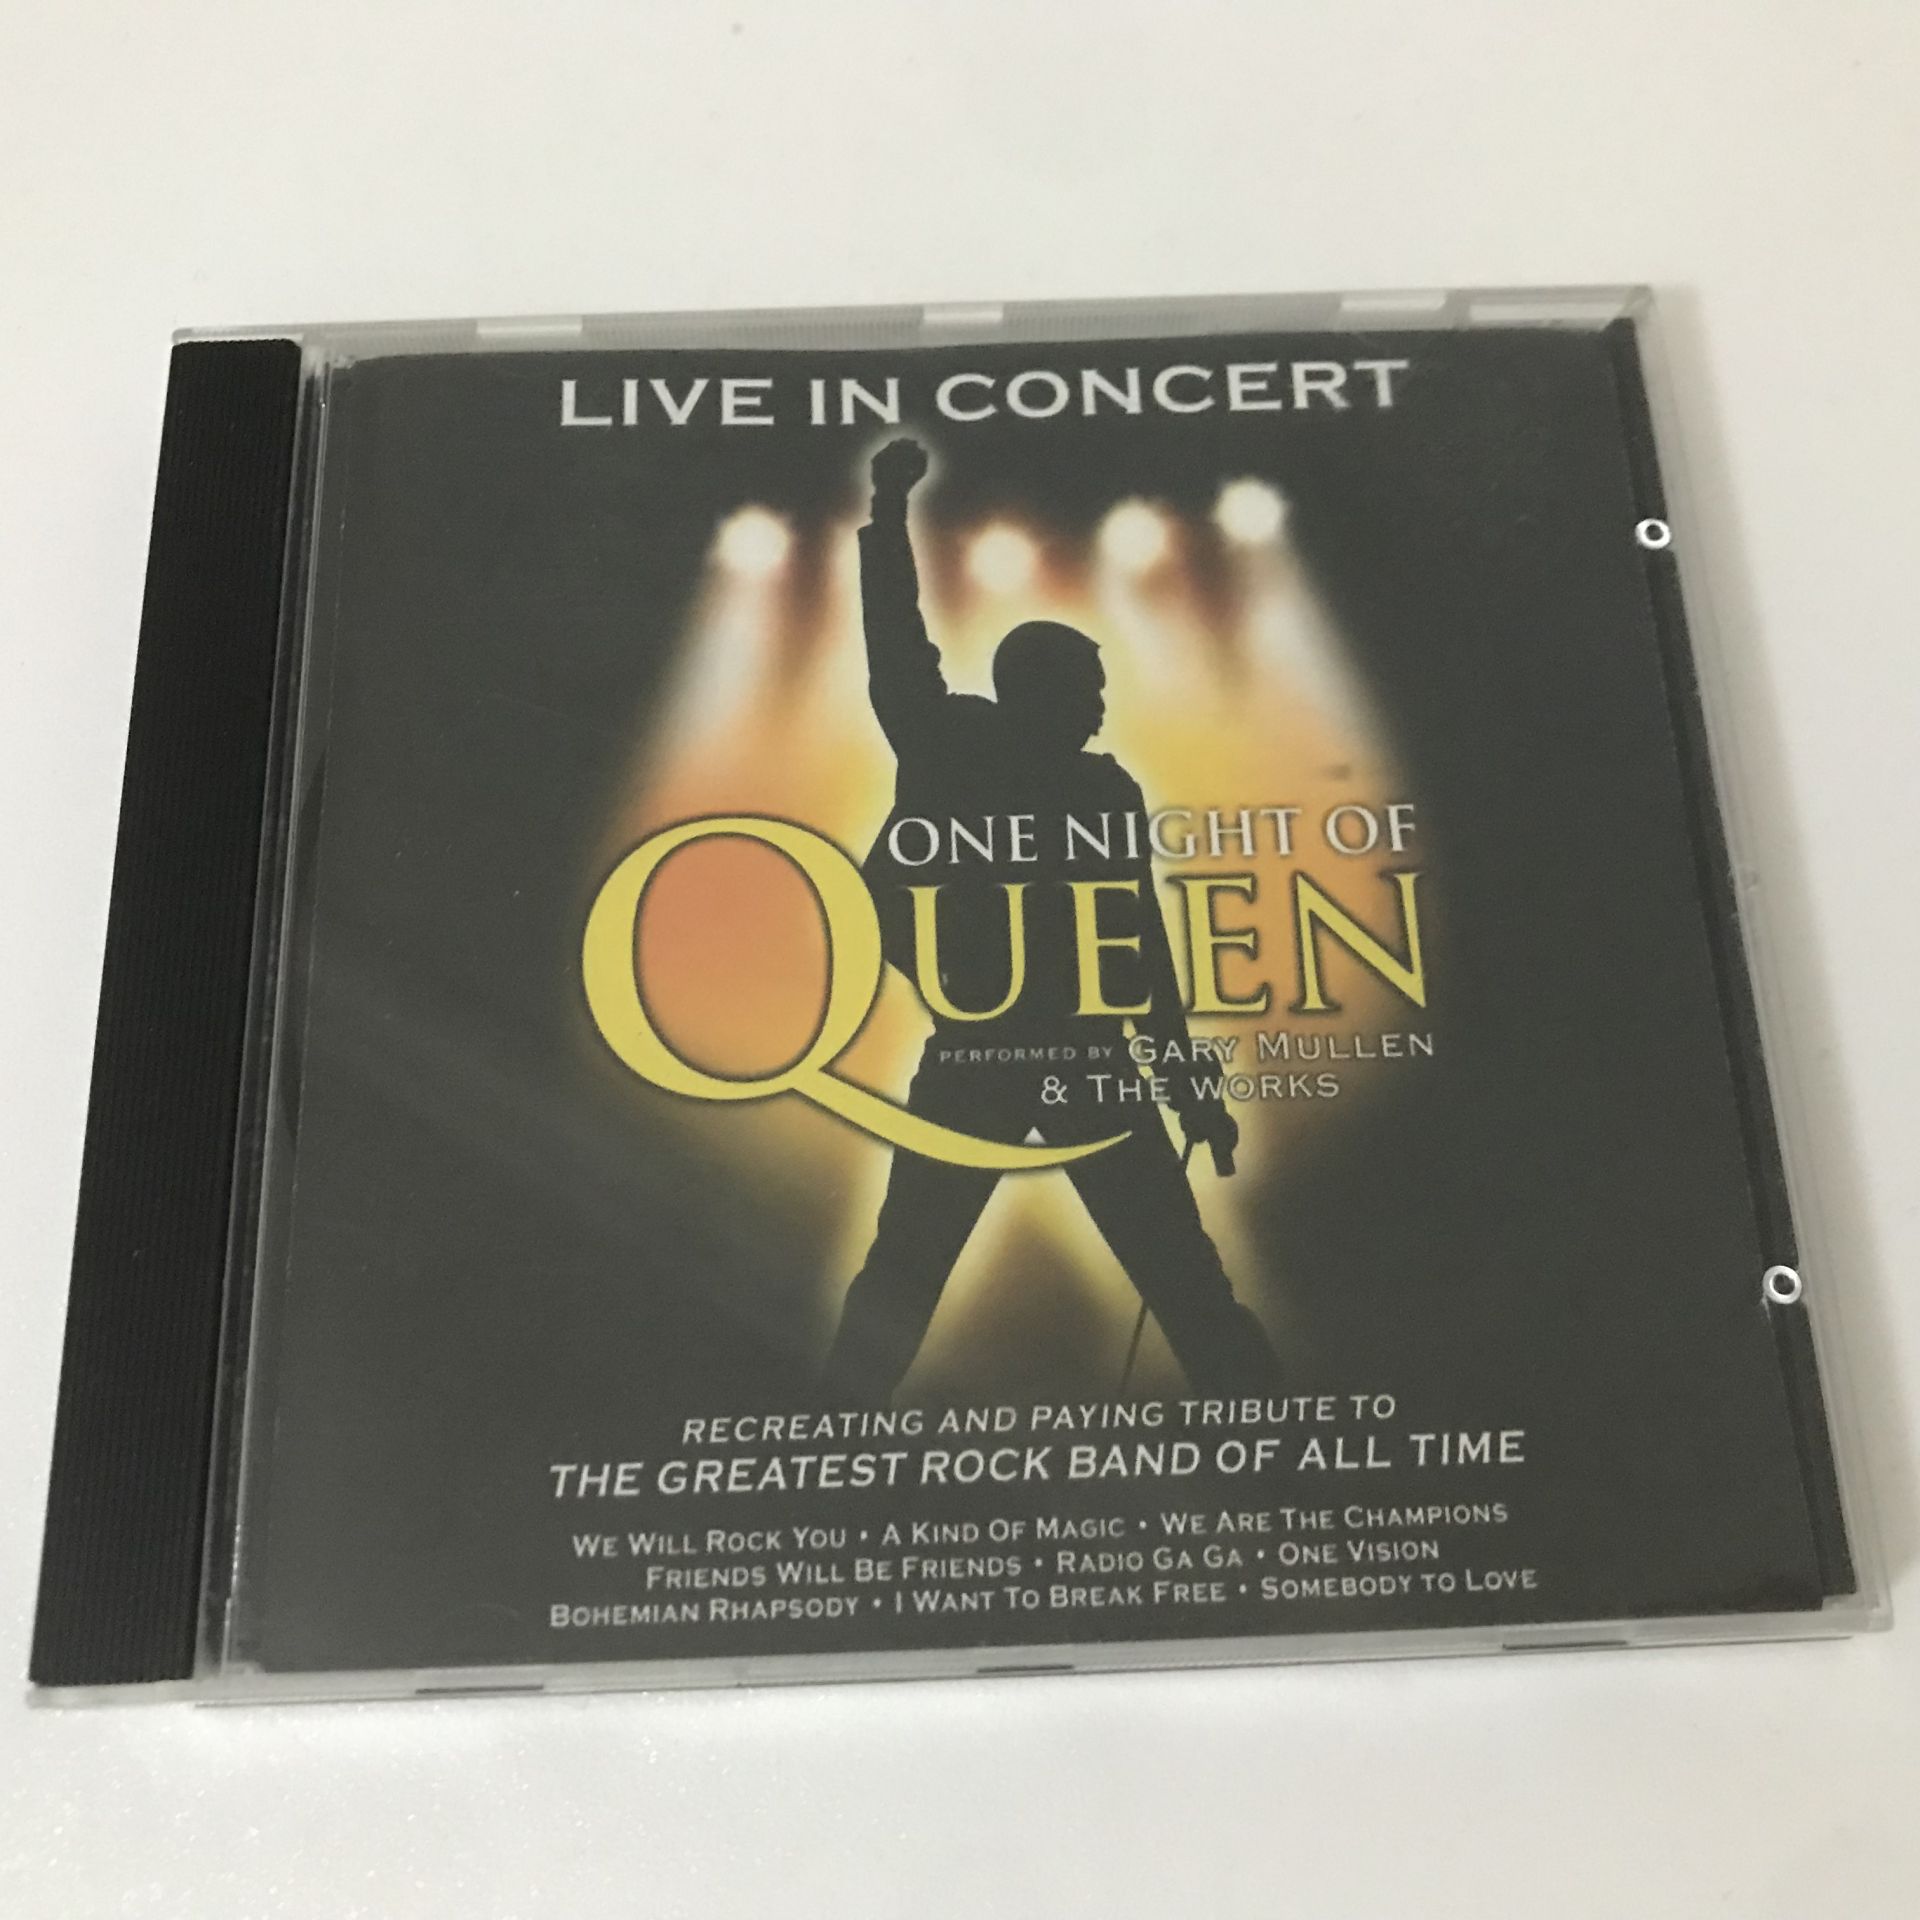 Gary Mullen & The Works – One Night Of Queen: Live in Concert